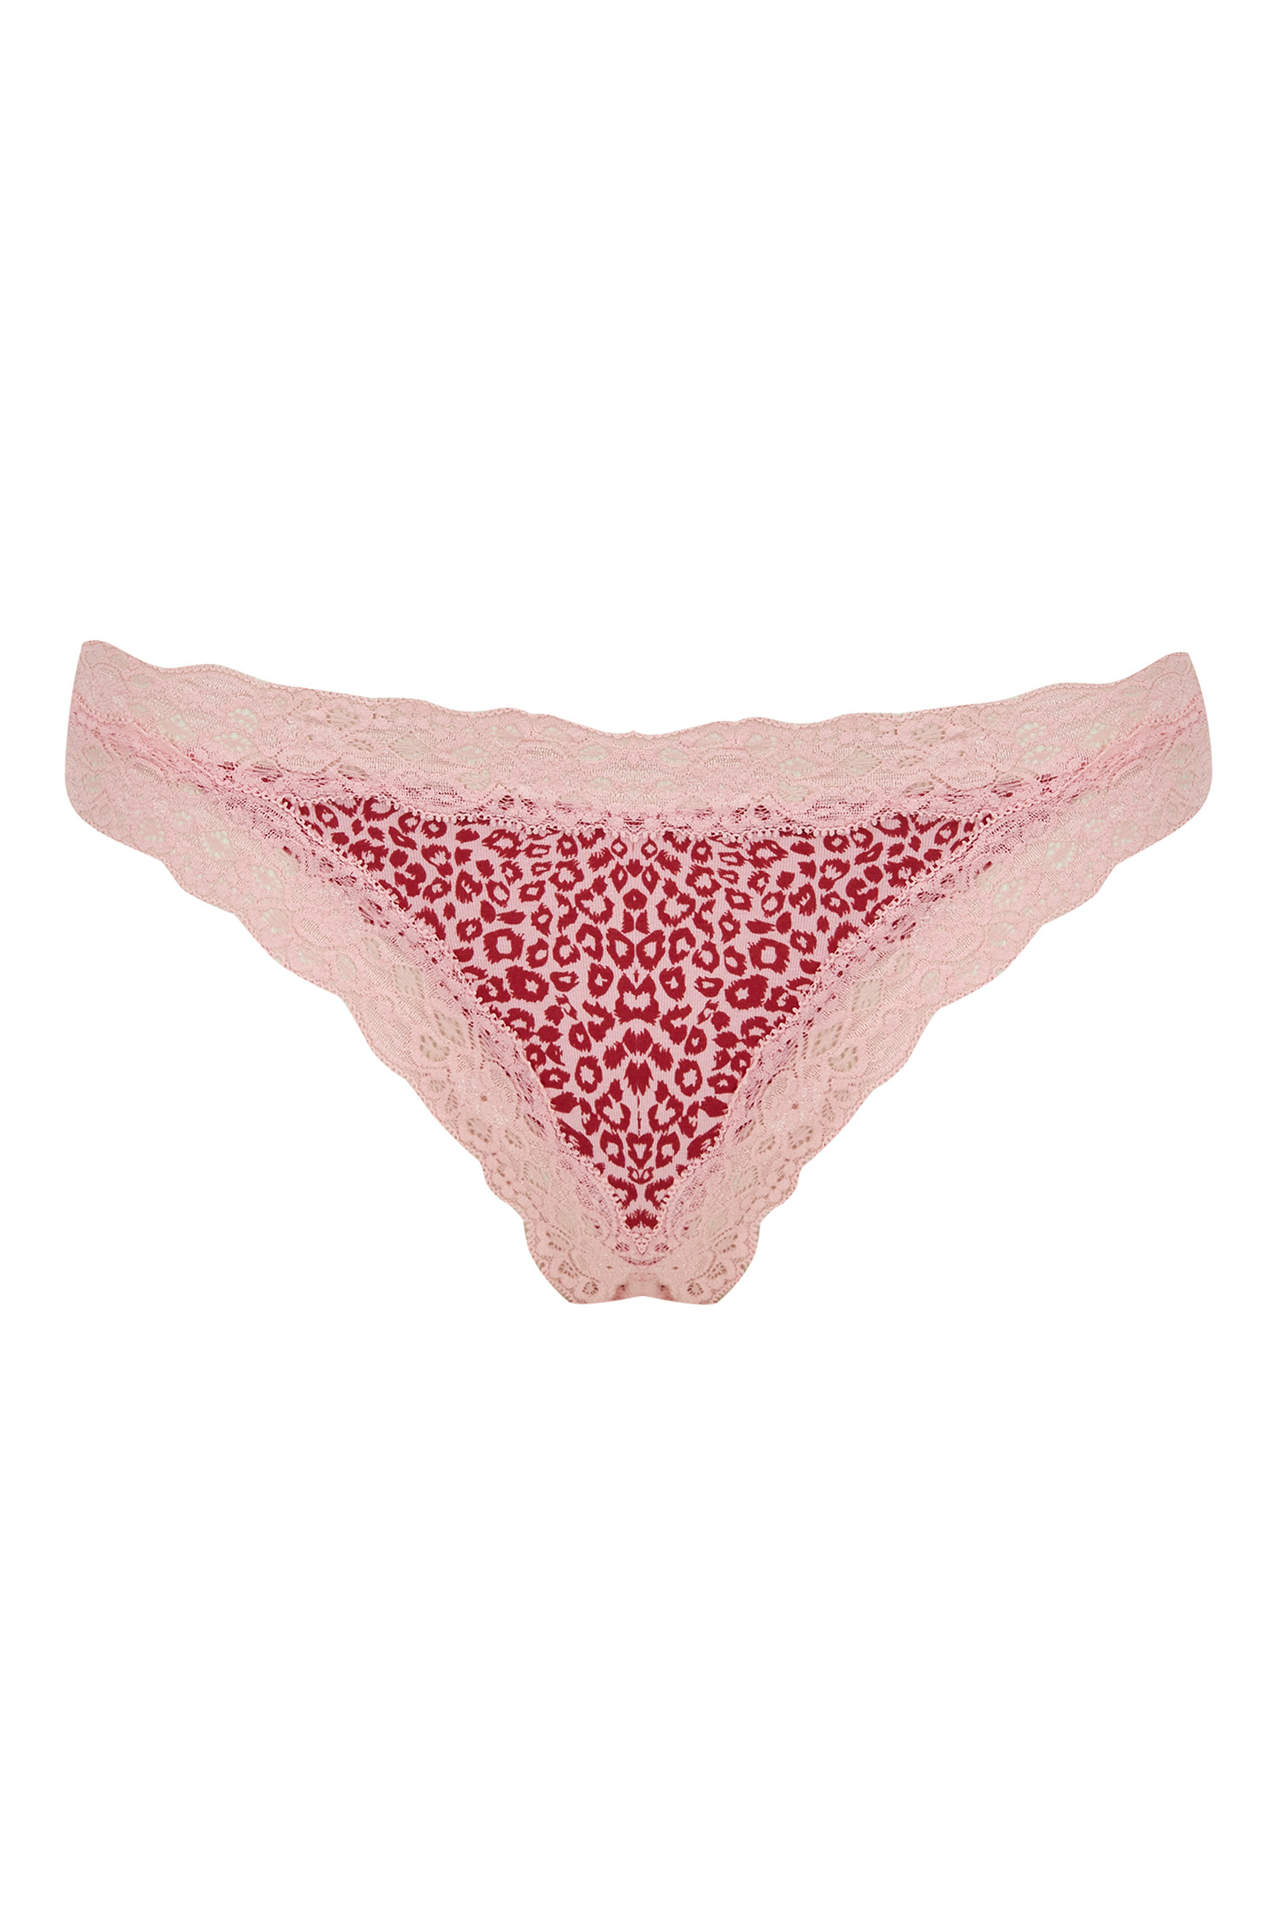 DEFACTO Fall in Love Valentine Lace Brazilian Panties